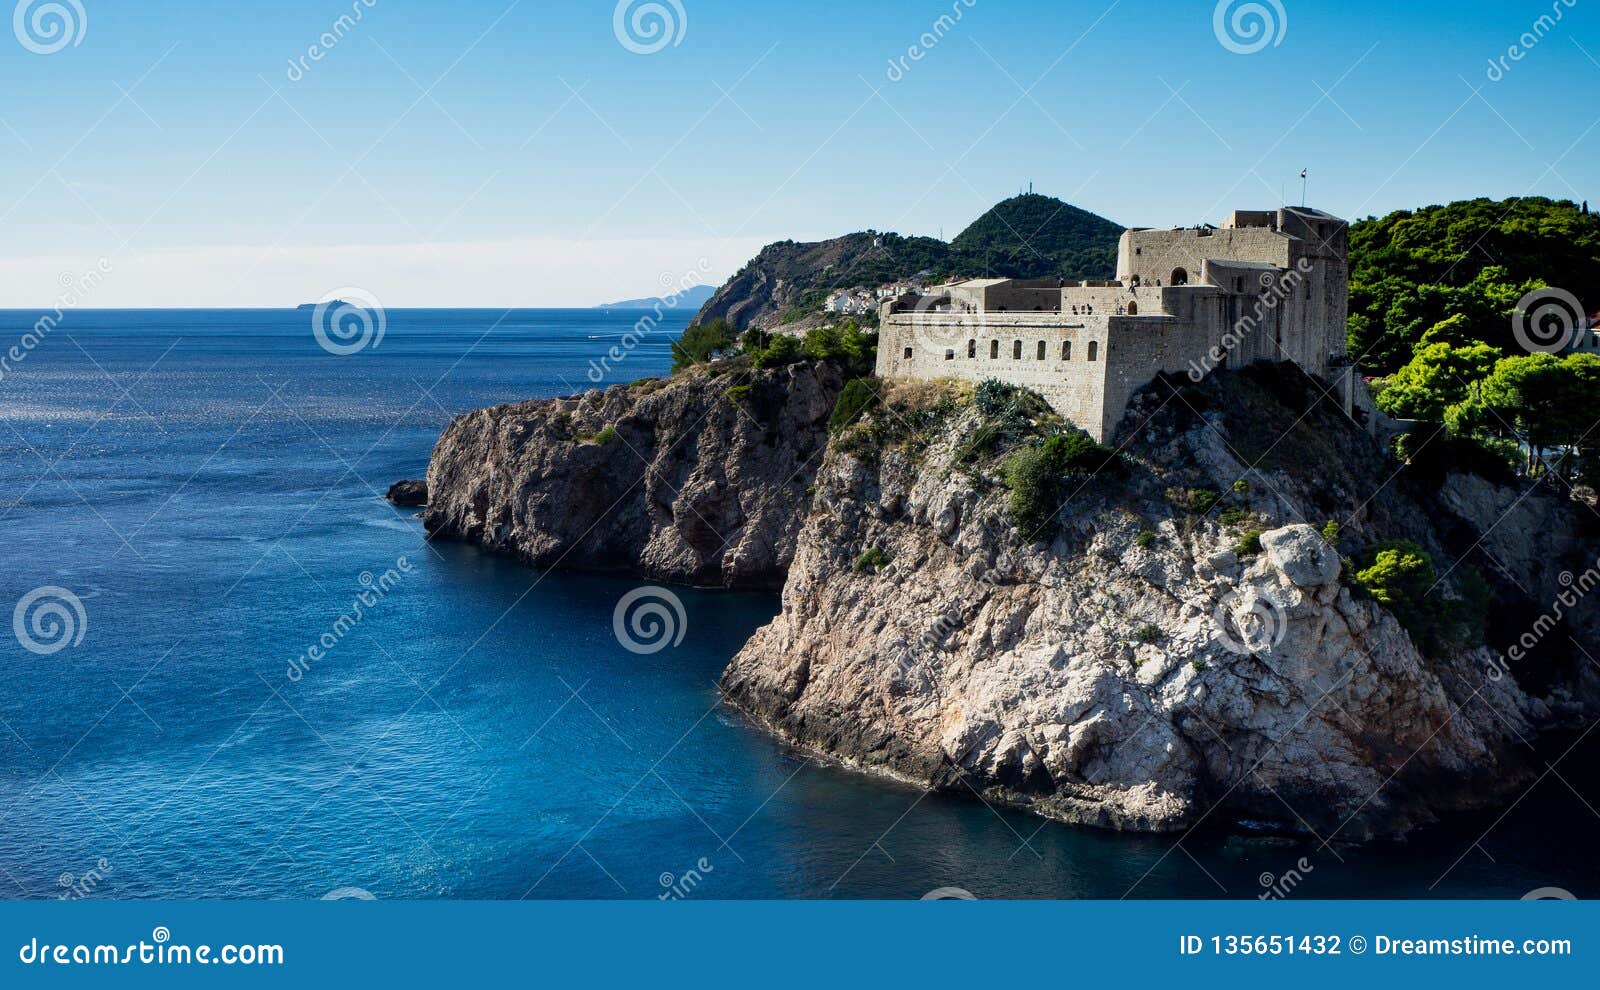 fortress lovrijenac is a game of thrones shooting set in dubrovnik